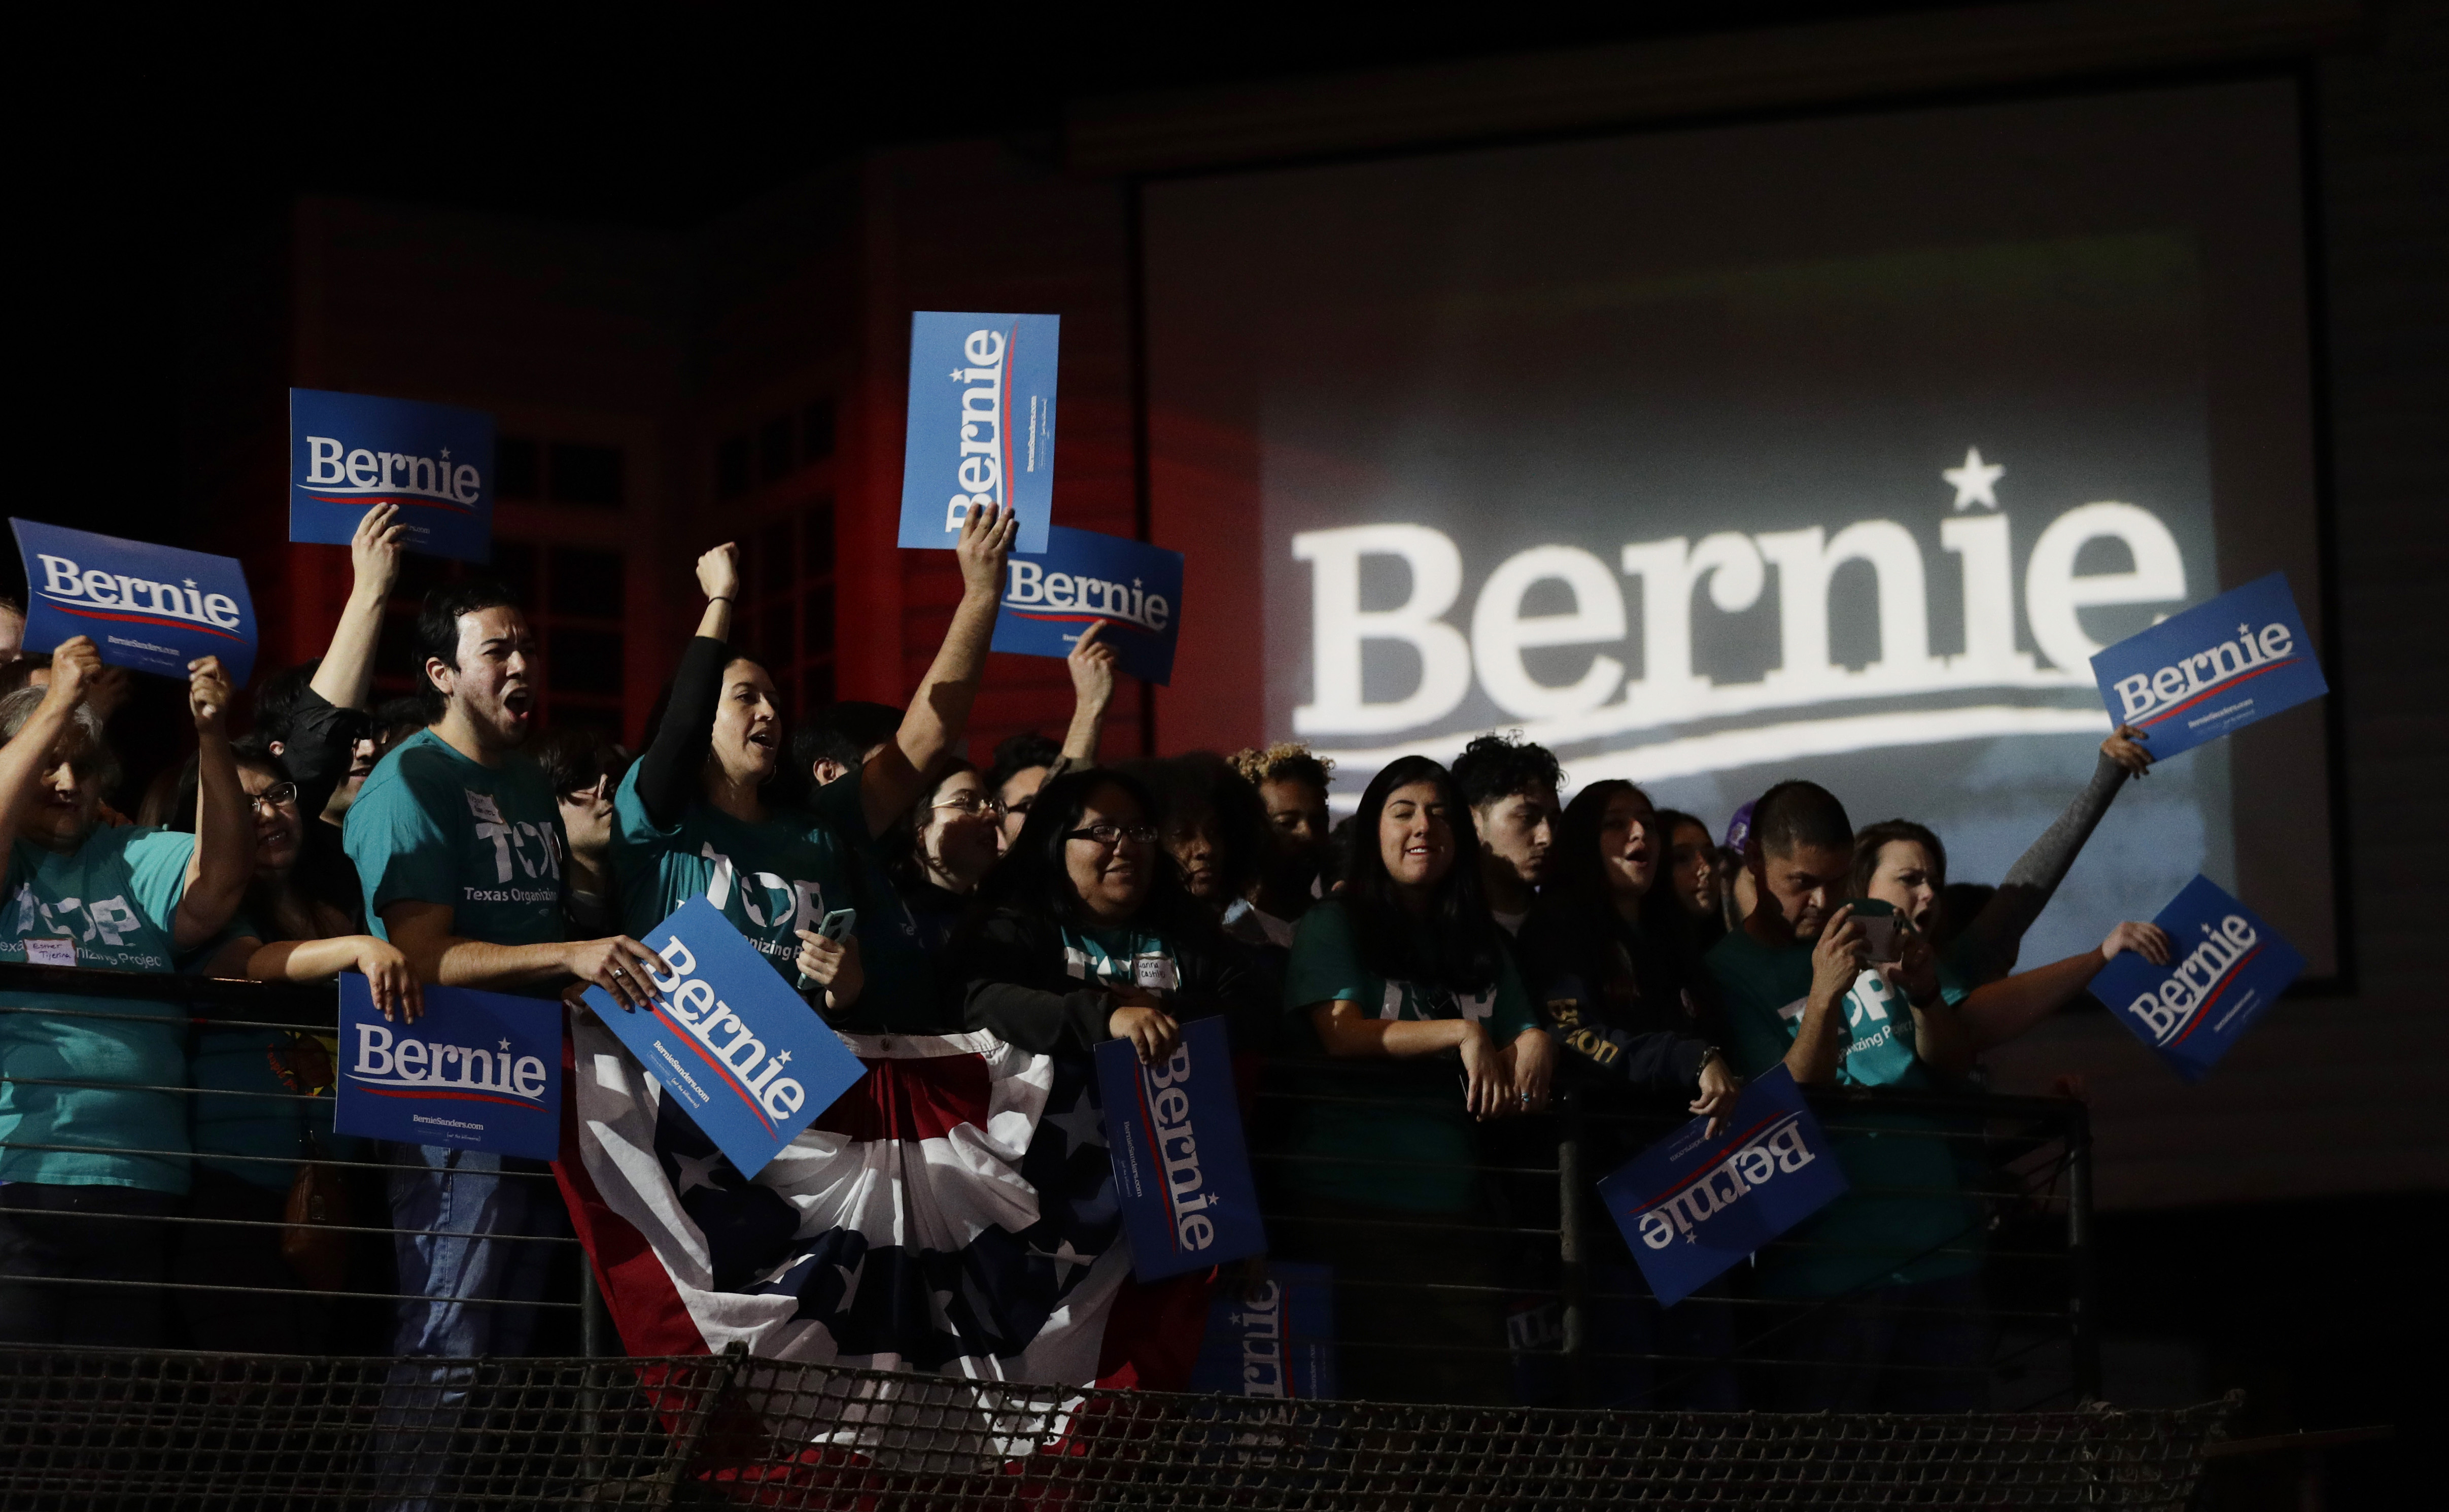 Supporters of Democratic presidential candidate Sen. Bernie Sanders, I-Vt., cheer during a campaign event in San Antonio, Saturday, Feb. 22, 2020. (AP Photo/Eric Gay)